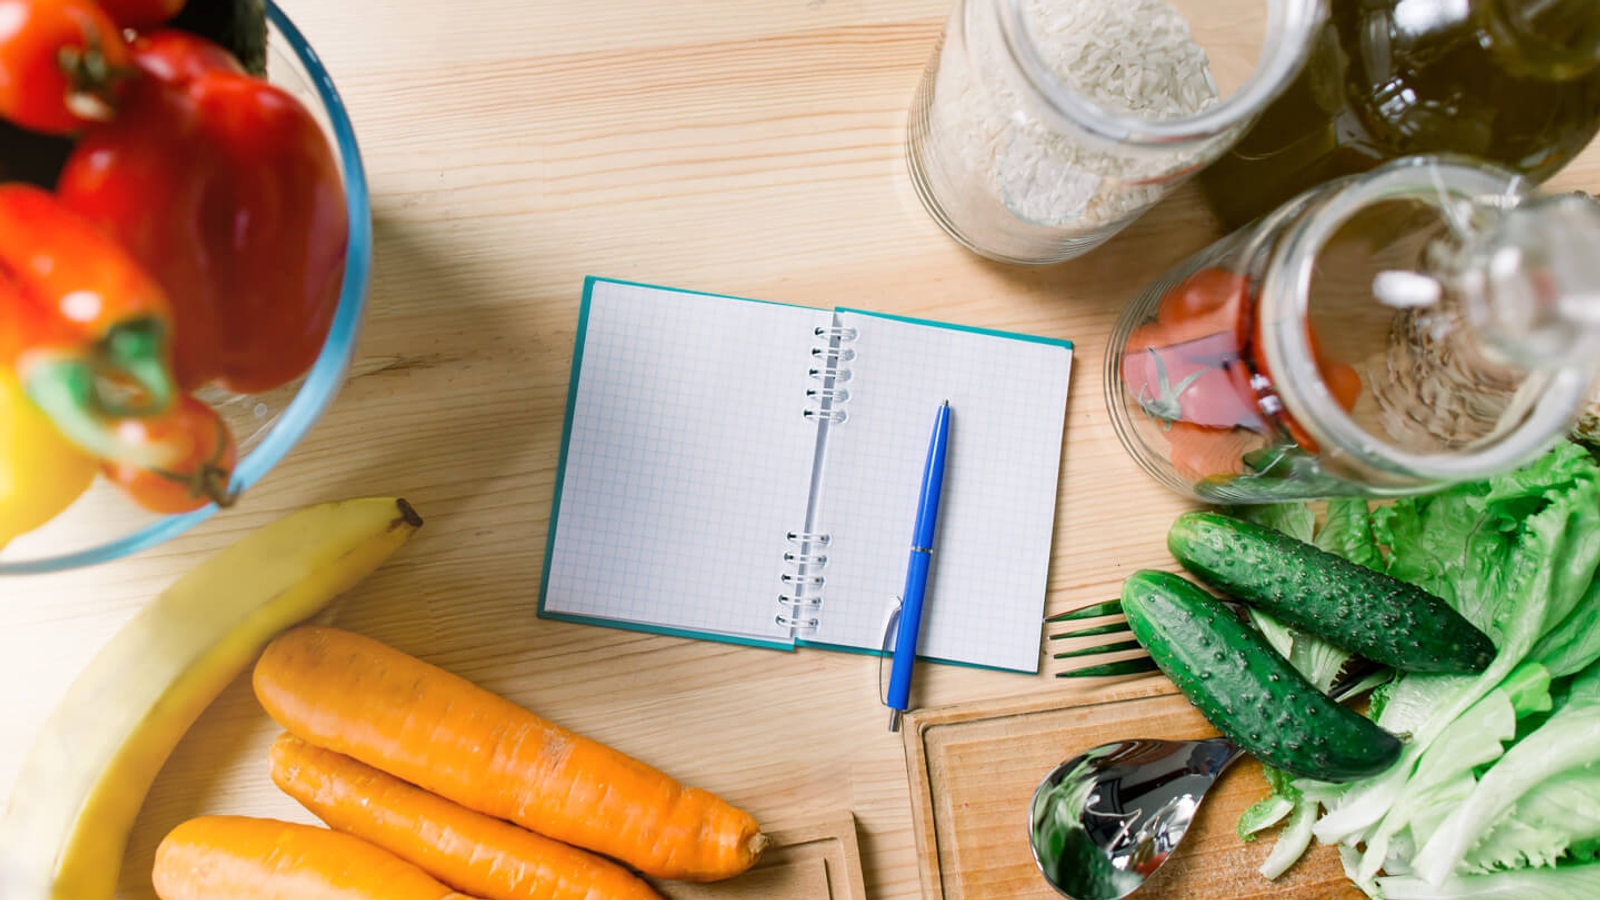 A kitchen countertop with a variety of fresh vegetables, including carrots and bell peppers, and kitchen essentials like a notebook, a pen, and rice grains, suggesting meal planning or recipe preparation.